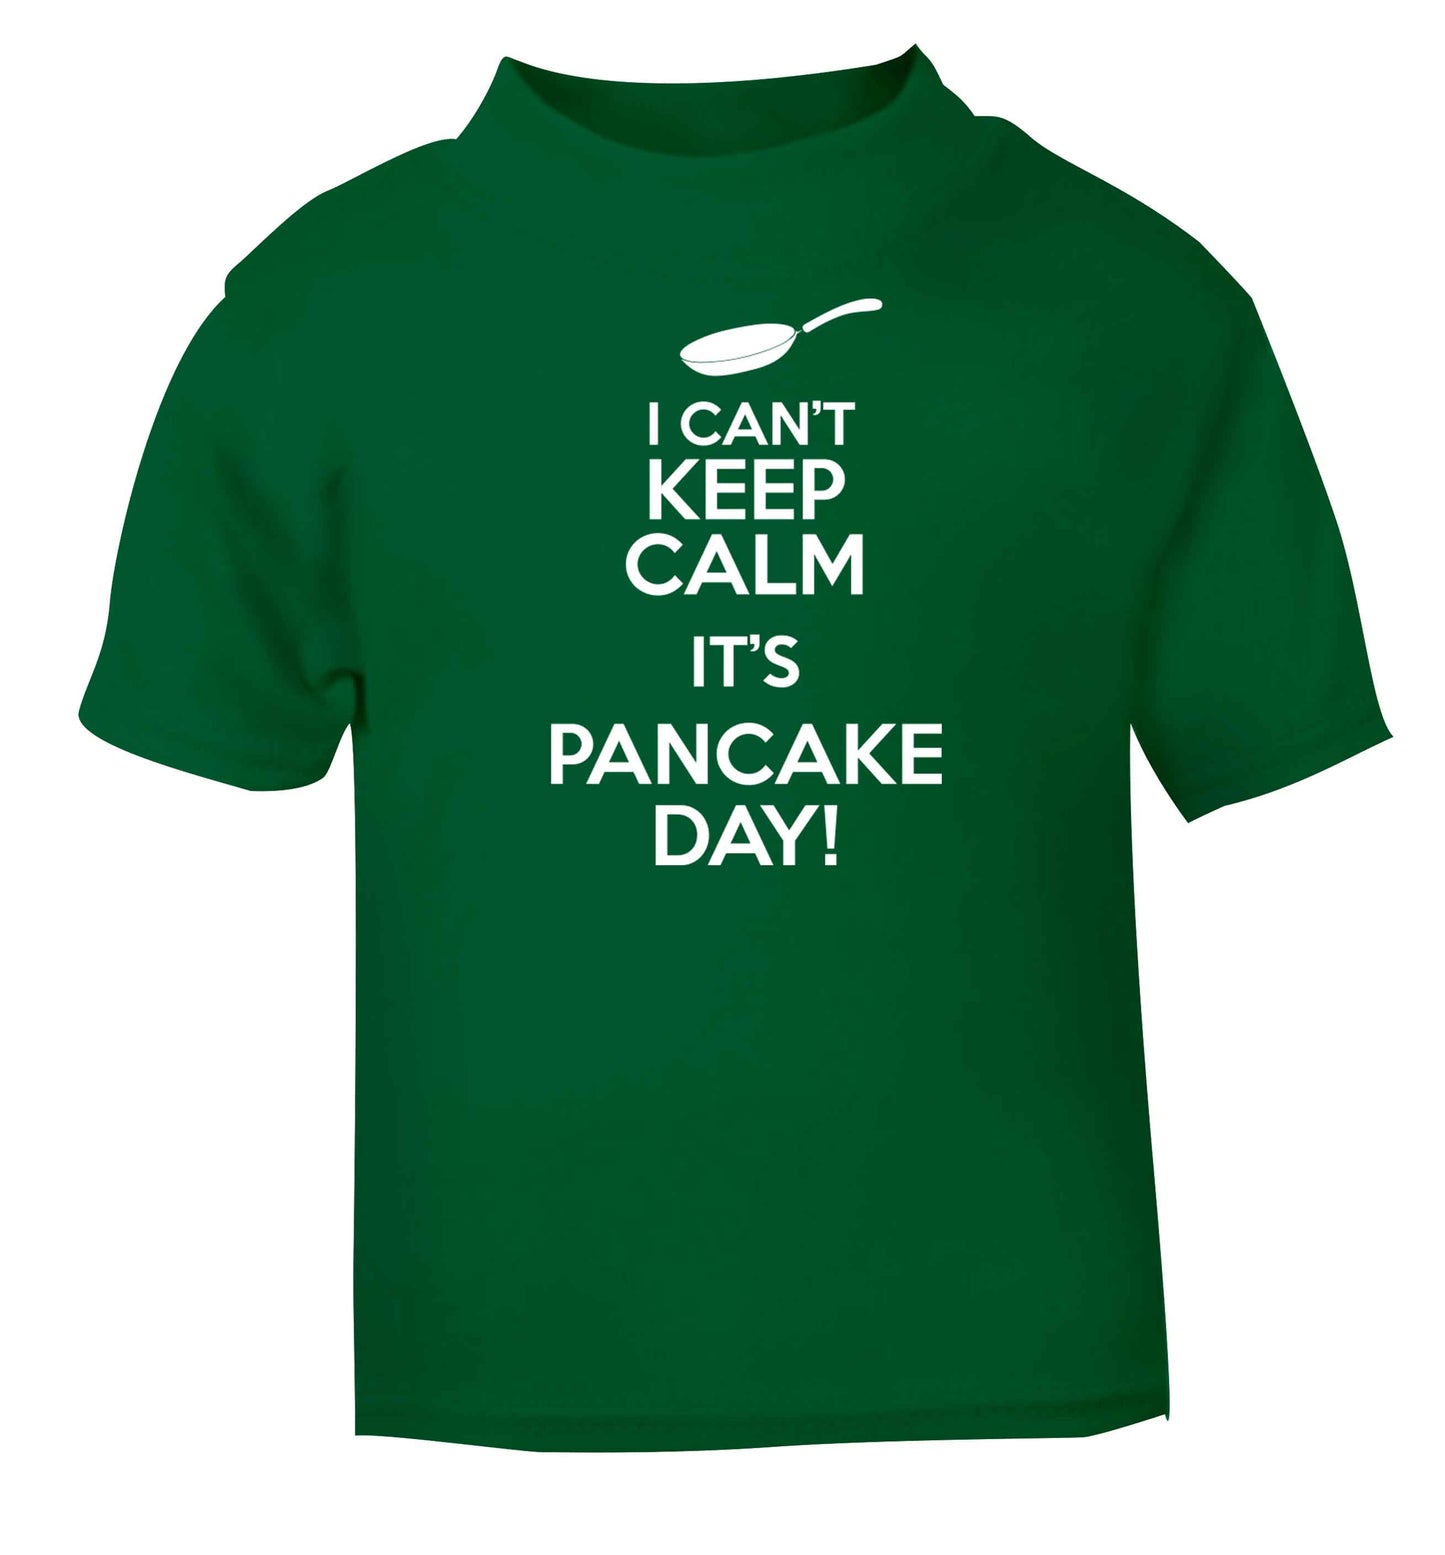 I can't keep calm it's pancake day! green baby toddler Tshirt 2 Years